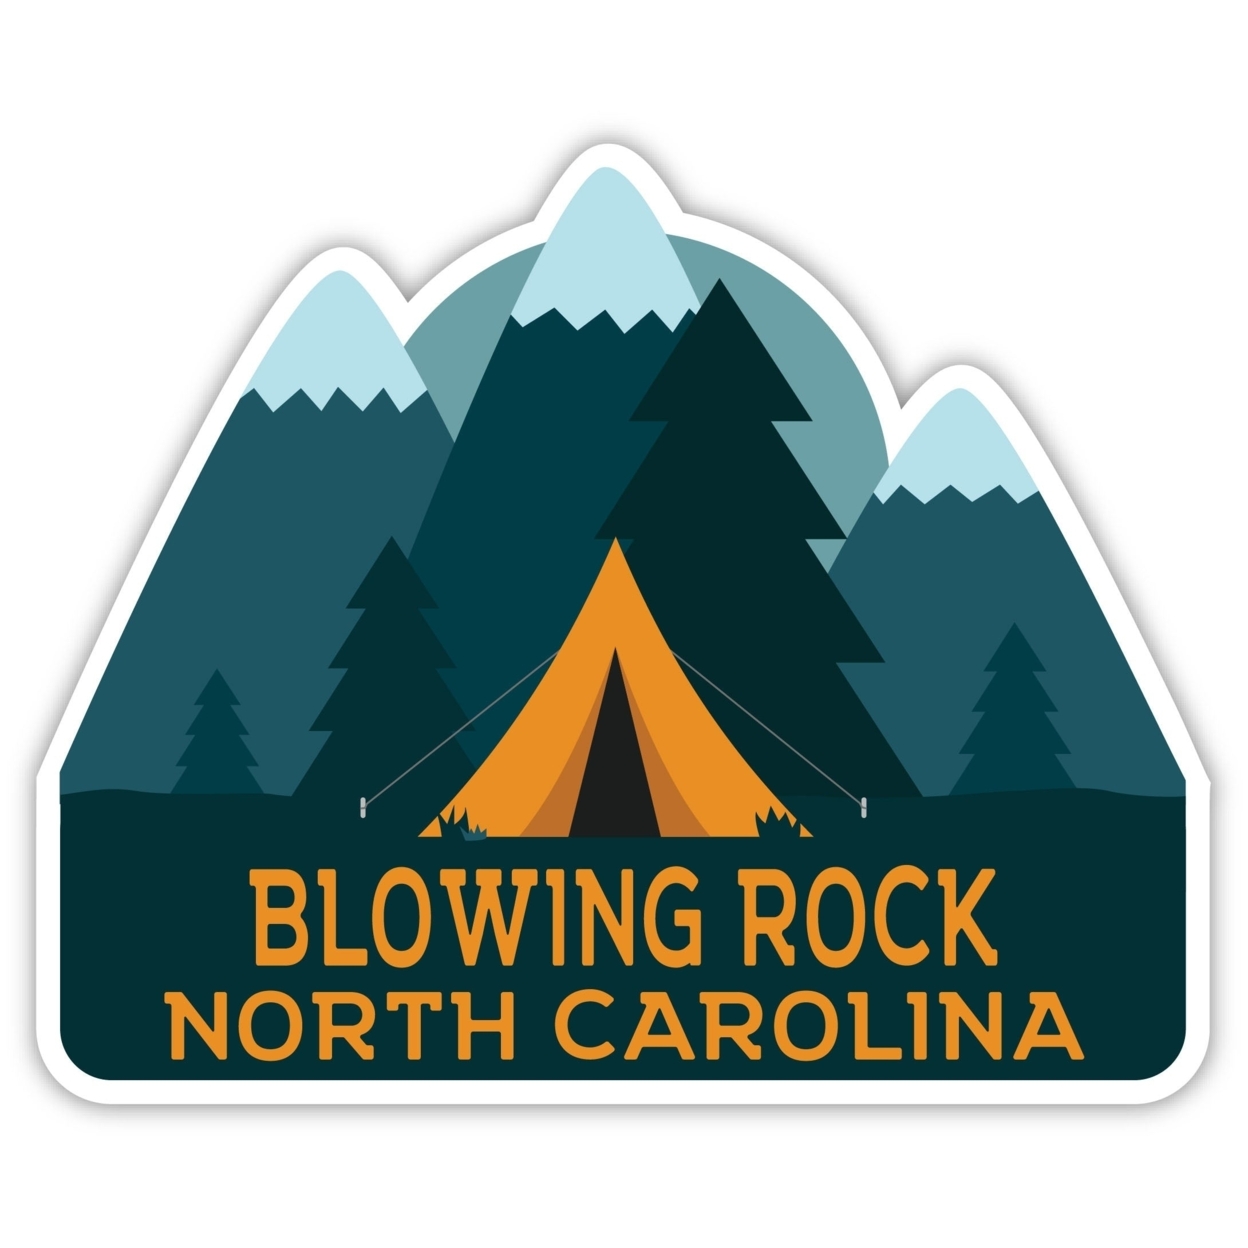 Blowing Rock North Carolina Souvenir Decorative Stickers (Choose Theme And Size) - 4-Pack, 6-Inch, Adventures Awaits